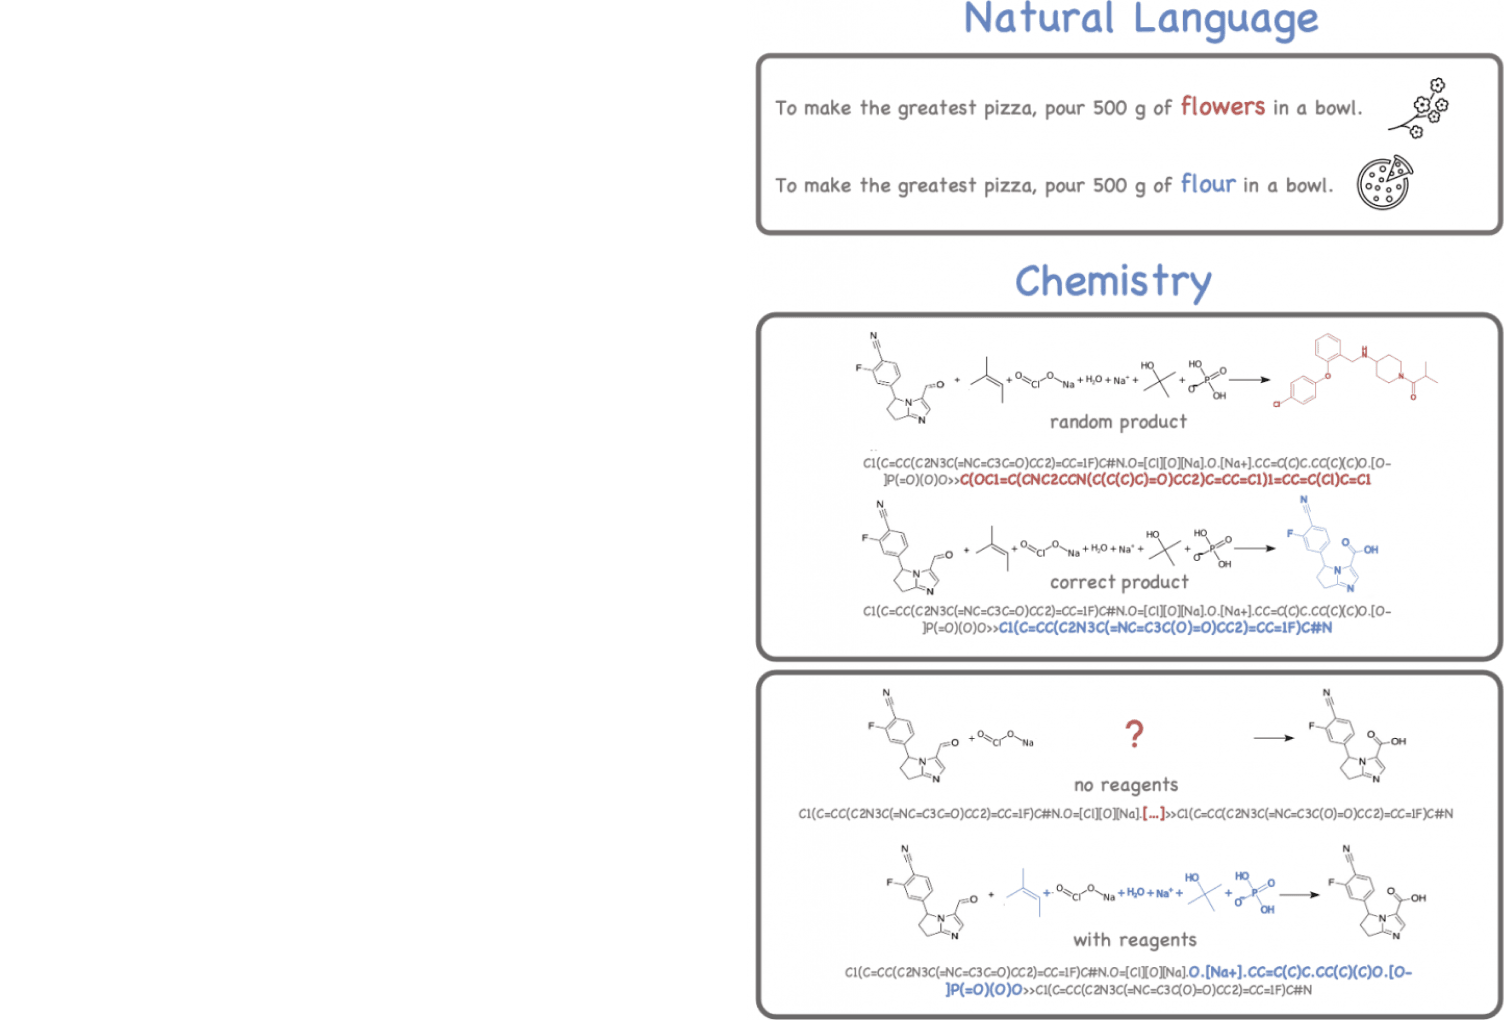 A decorative chart presenting translation errors in natural language and in chemical reactions